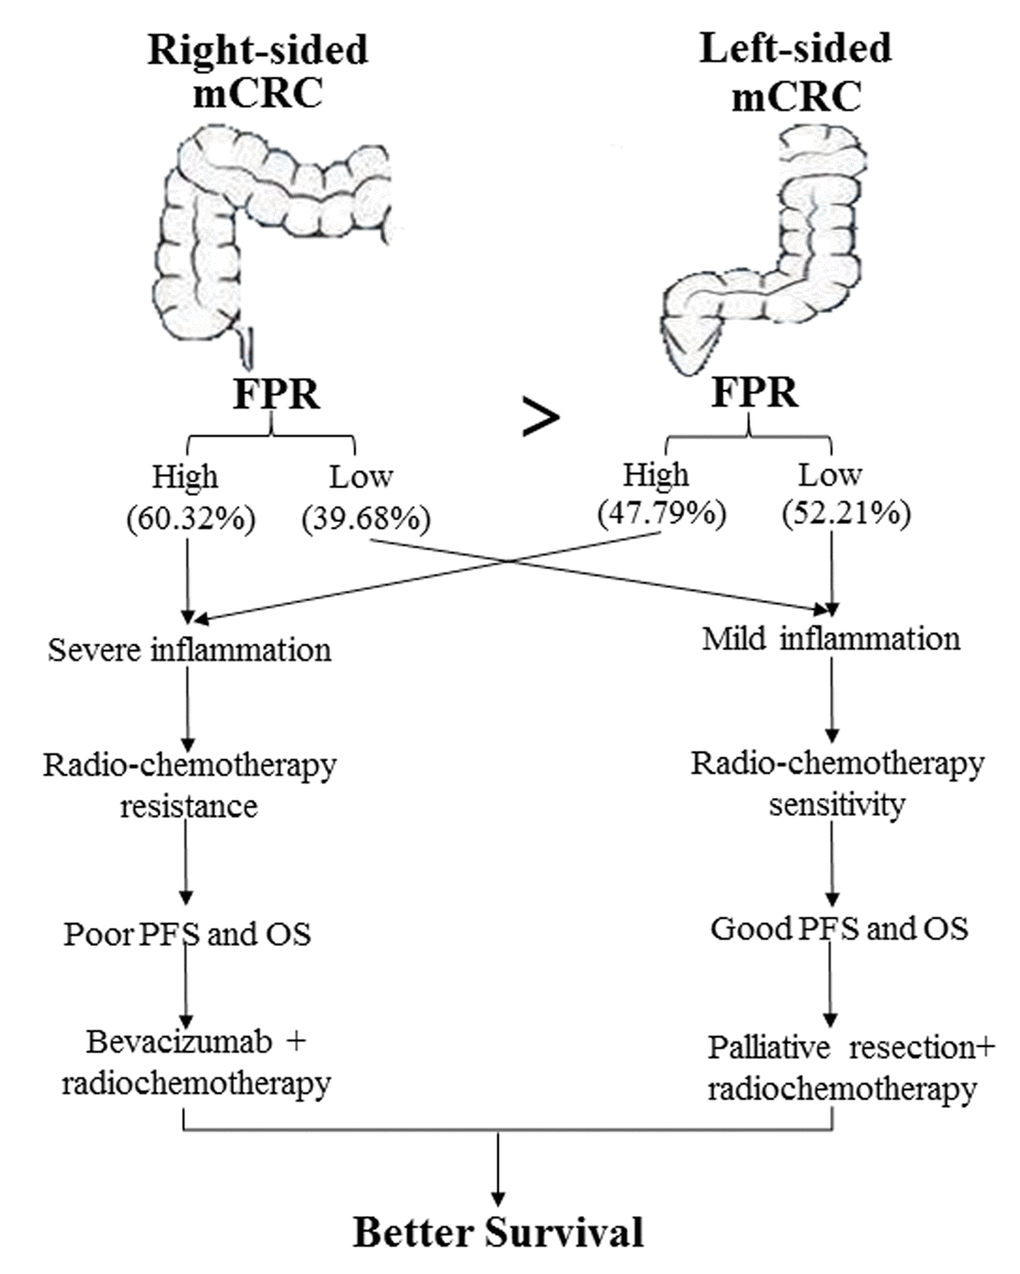 Diagram depicting the cause of survival difference between left- and right-sided mCRC and the optimal common treatment selection for the patients according to FPR.